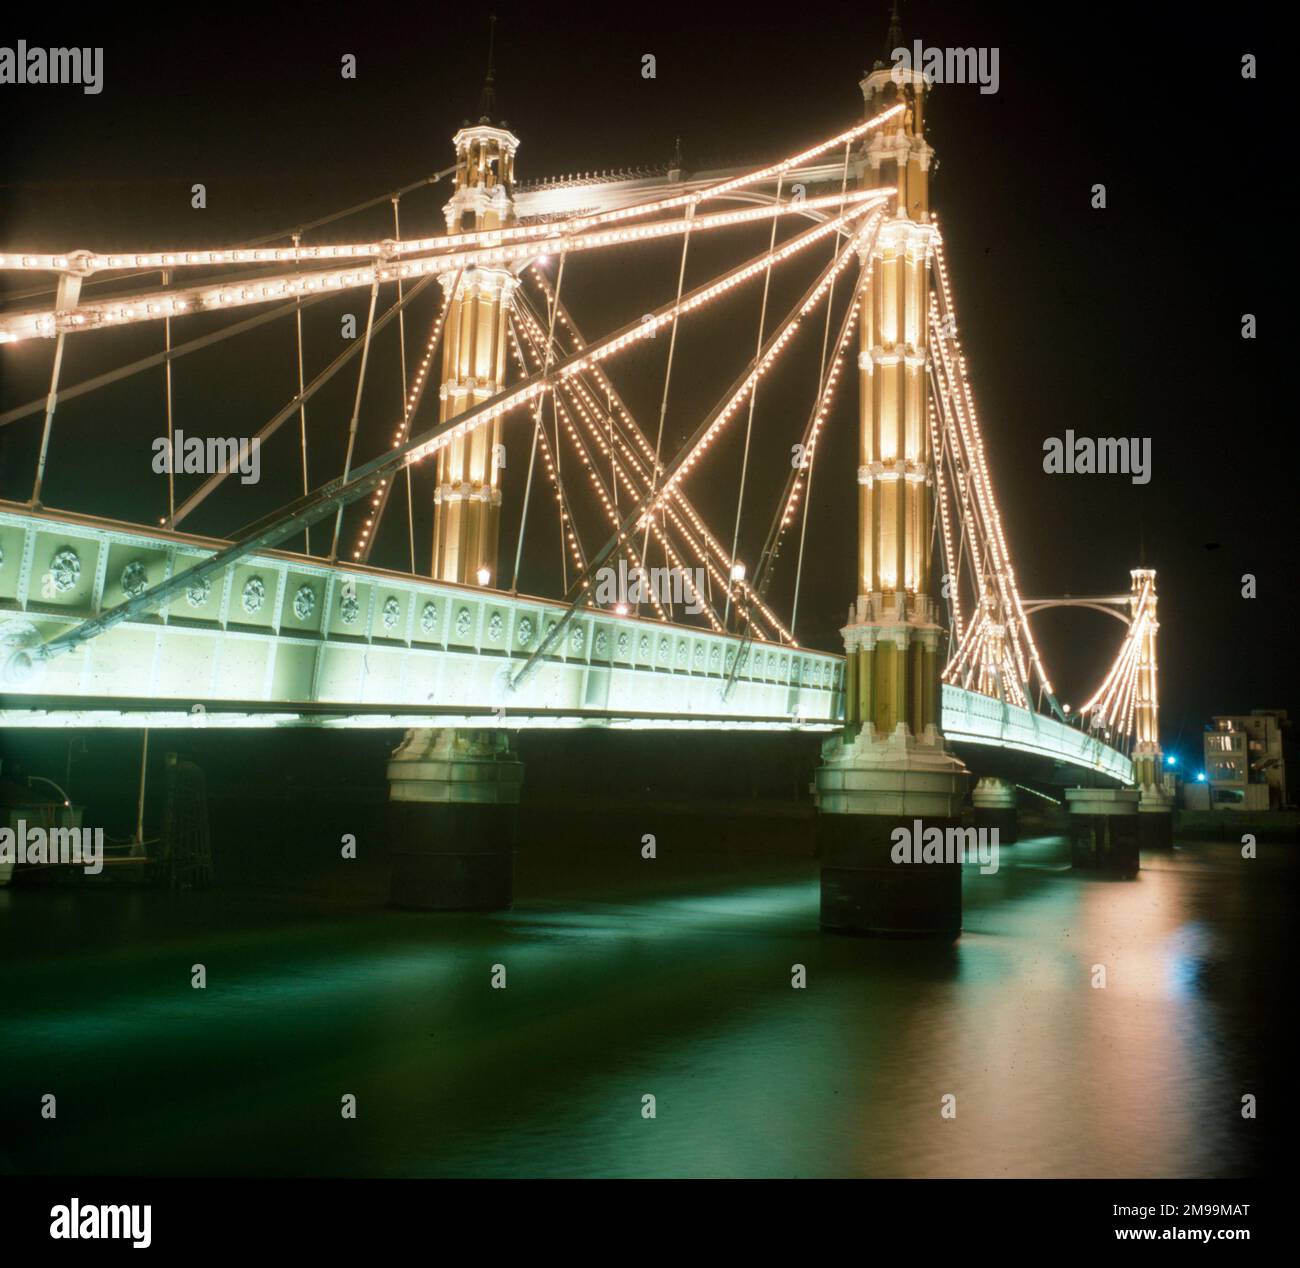 London - The Albert Bridge - illuminated at night. View from Chlesea on the north bank of the River Thames toward Battersea. Designed and built by Rowland Mason Ordish in 1873 as an Ordish–Lefeuvre system modified cable-stayed bridge Stock Photo